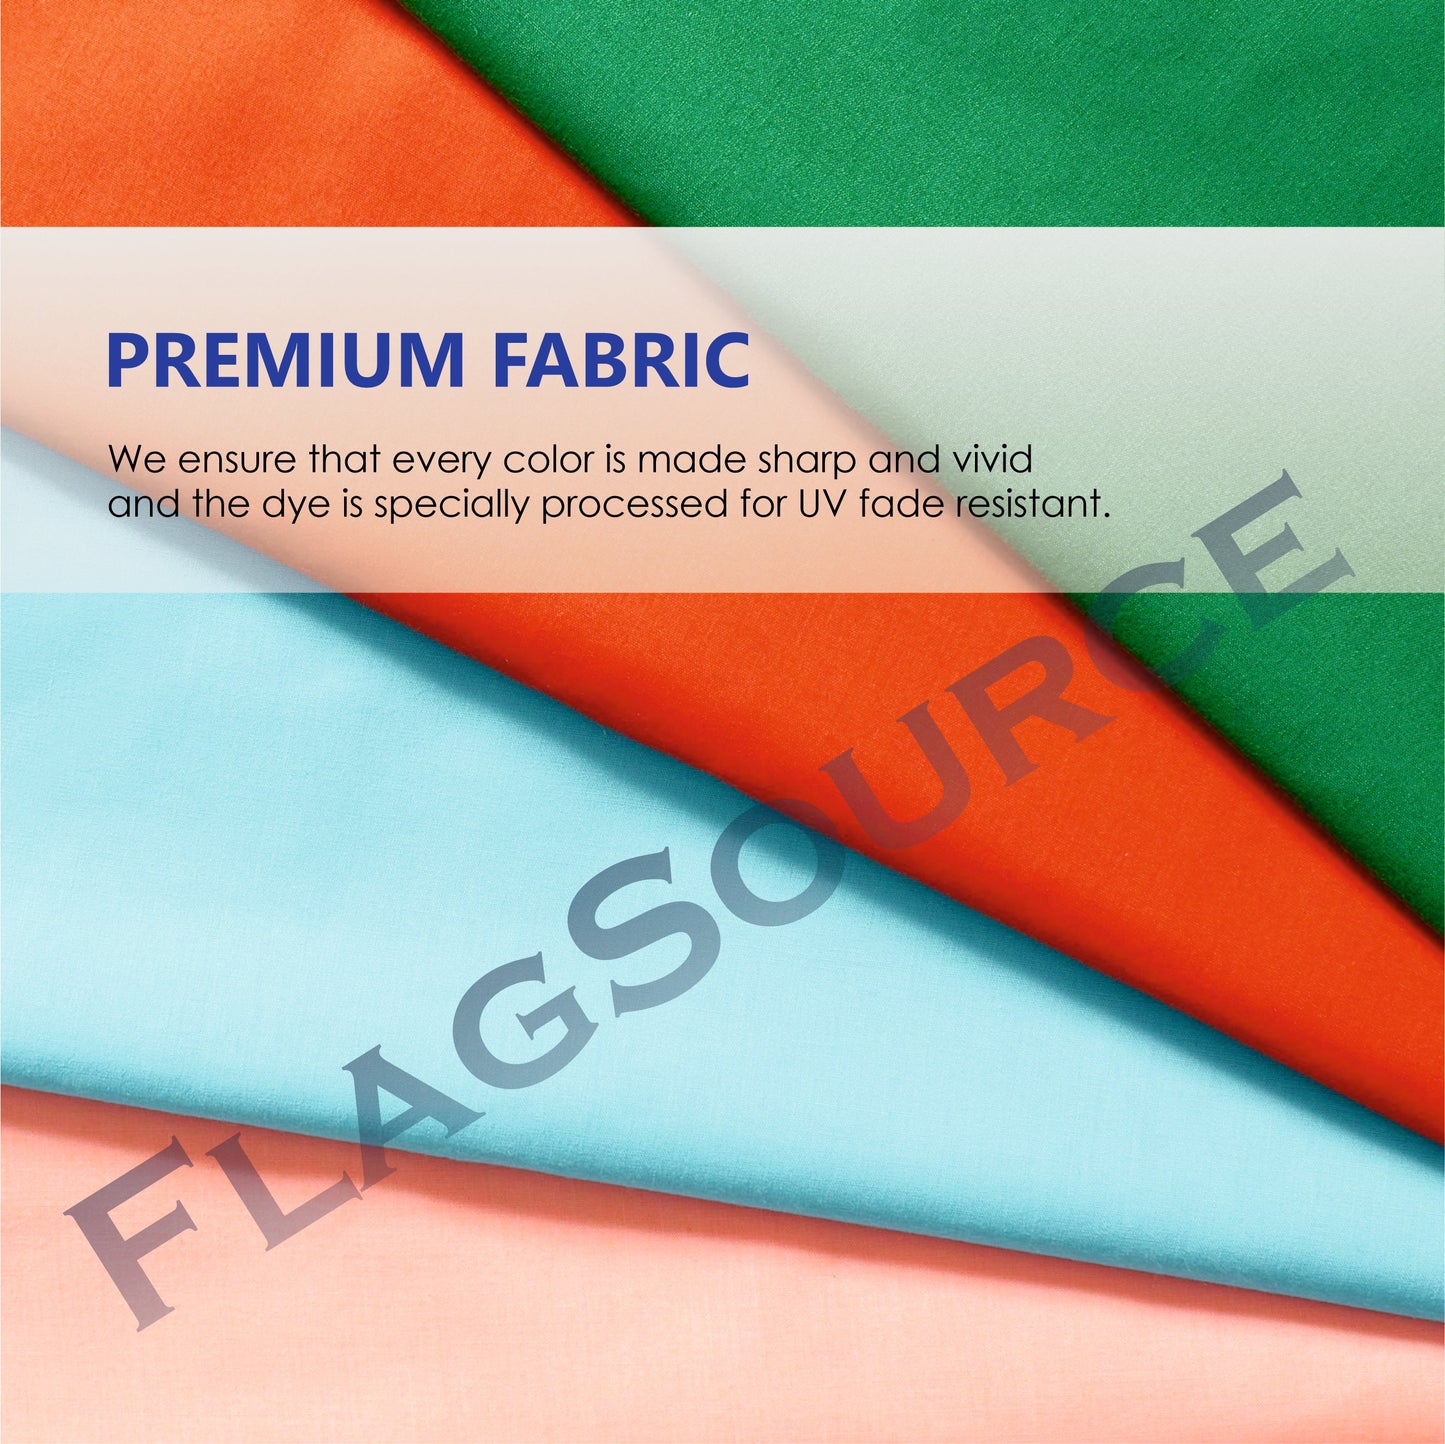 QUALITY OF FABRIC